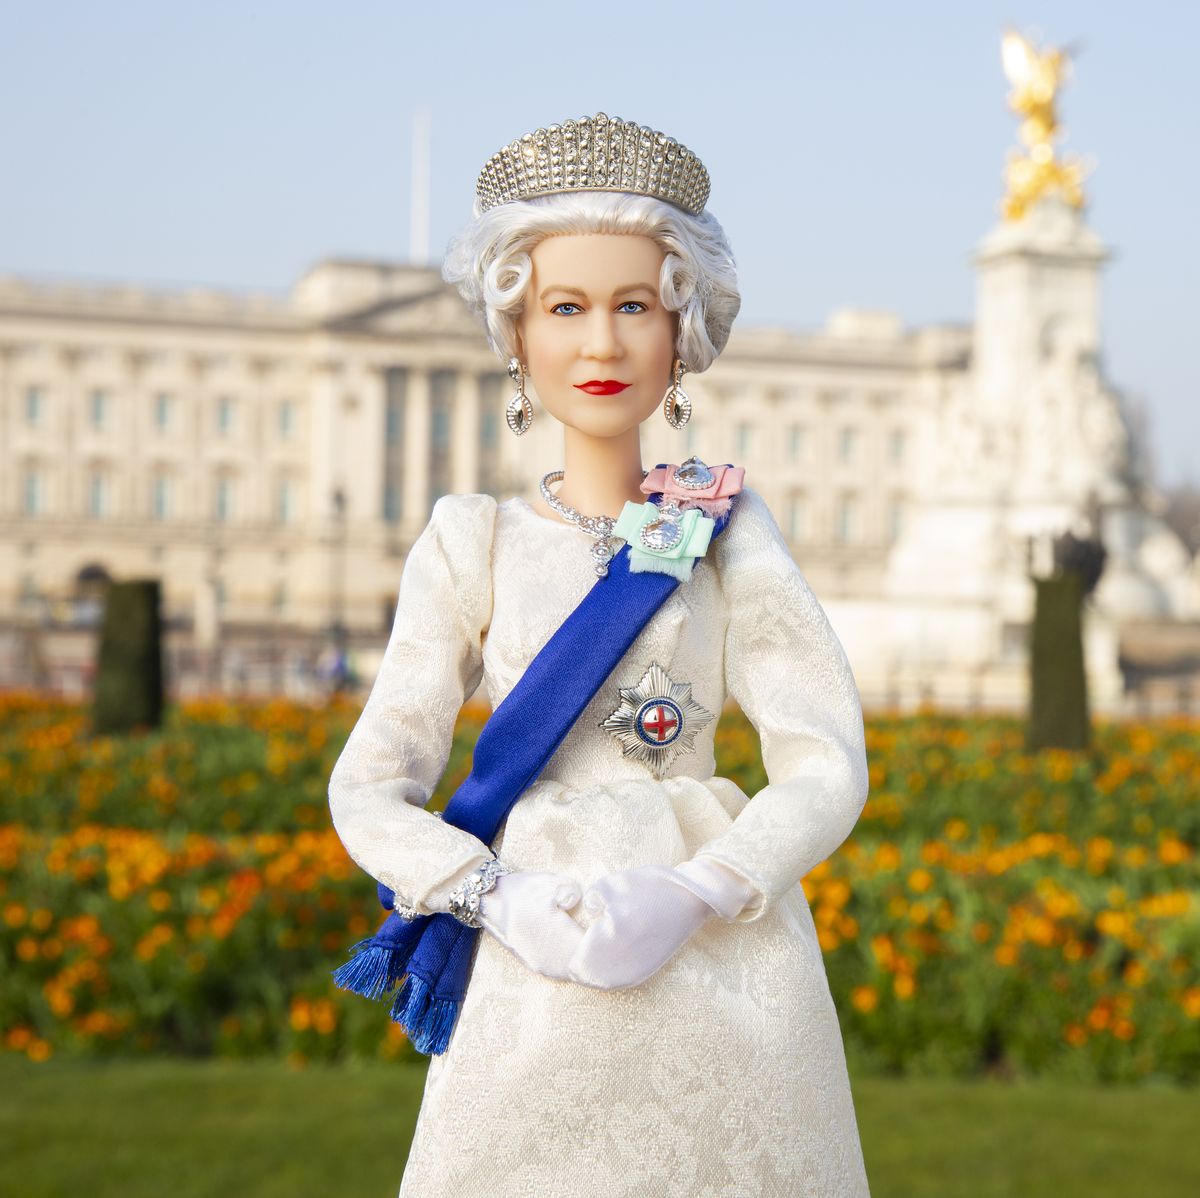 A Limited-Edition Barbie Doll of Queen Elizabeth Has Been Created